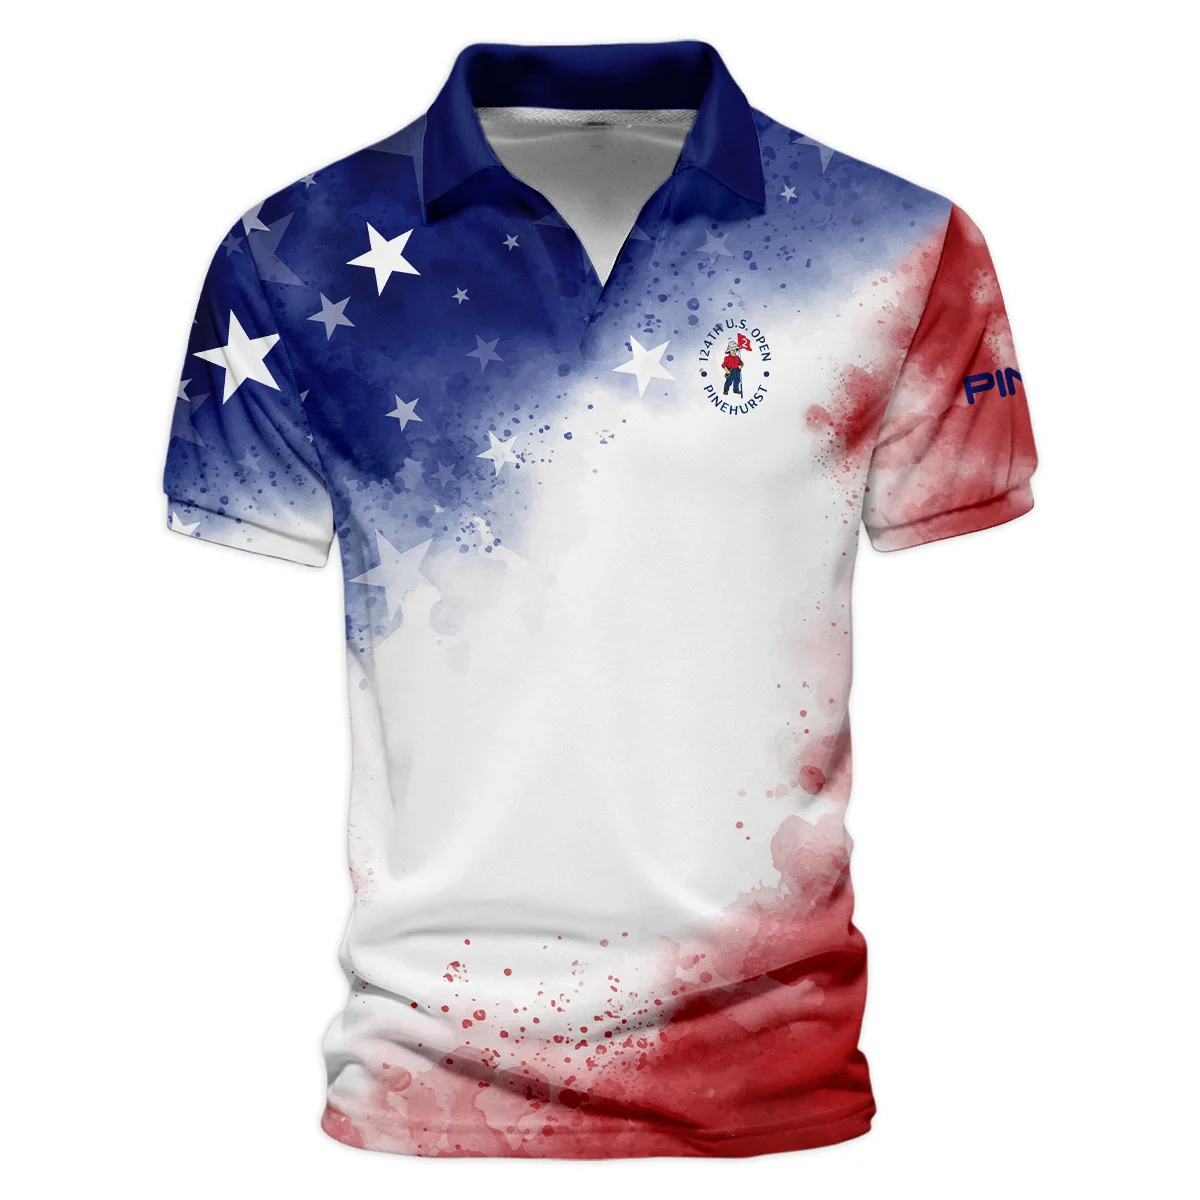 124th U.S. Open Pinehurst Ping Blue Red Watercolor Star White Backgound Vneck Polo Shirt Style Classic Polo Shirt For Men